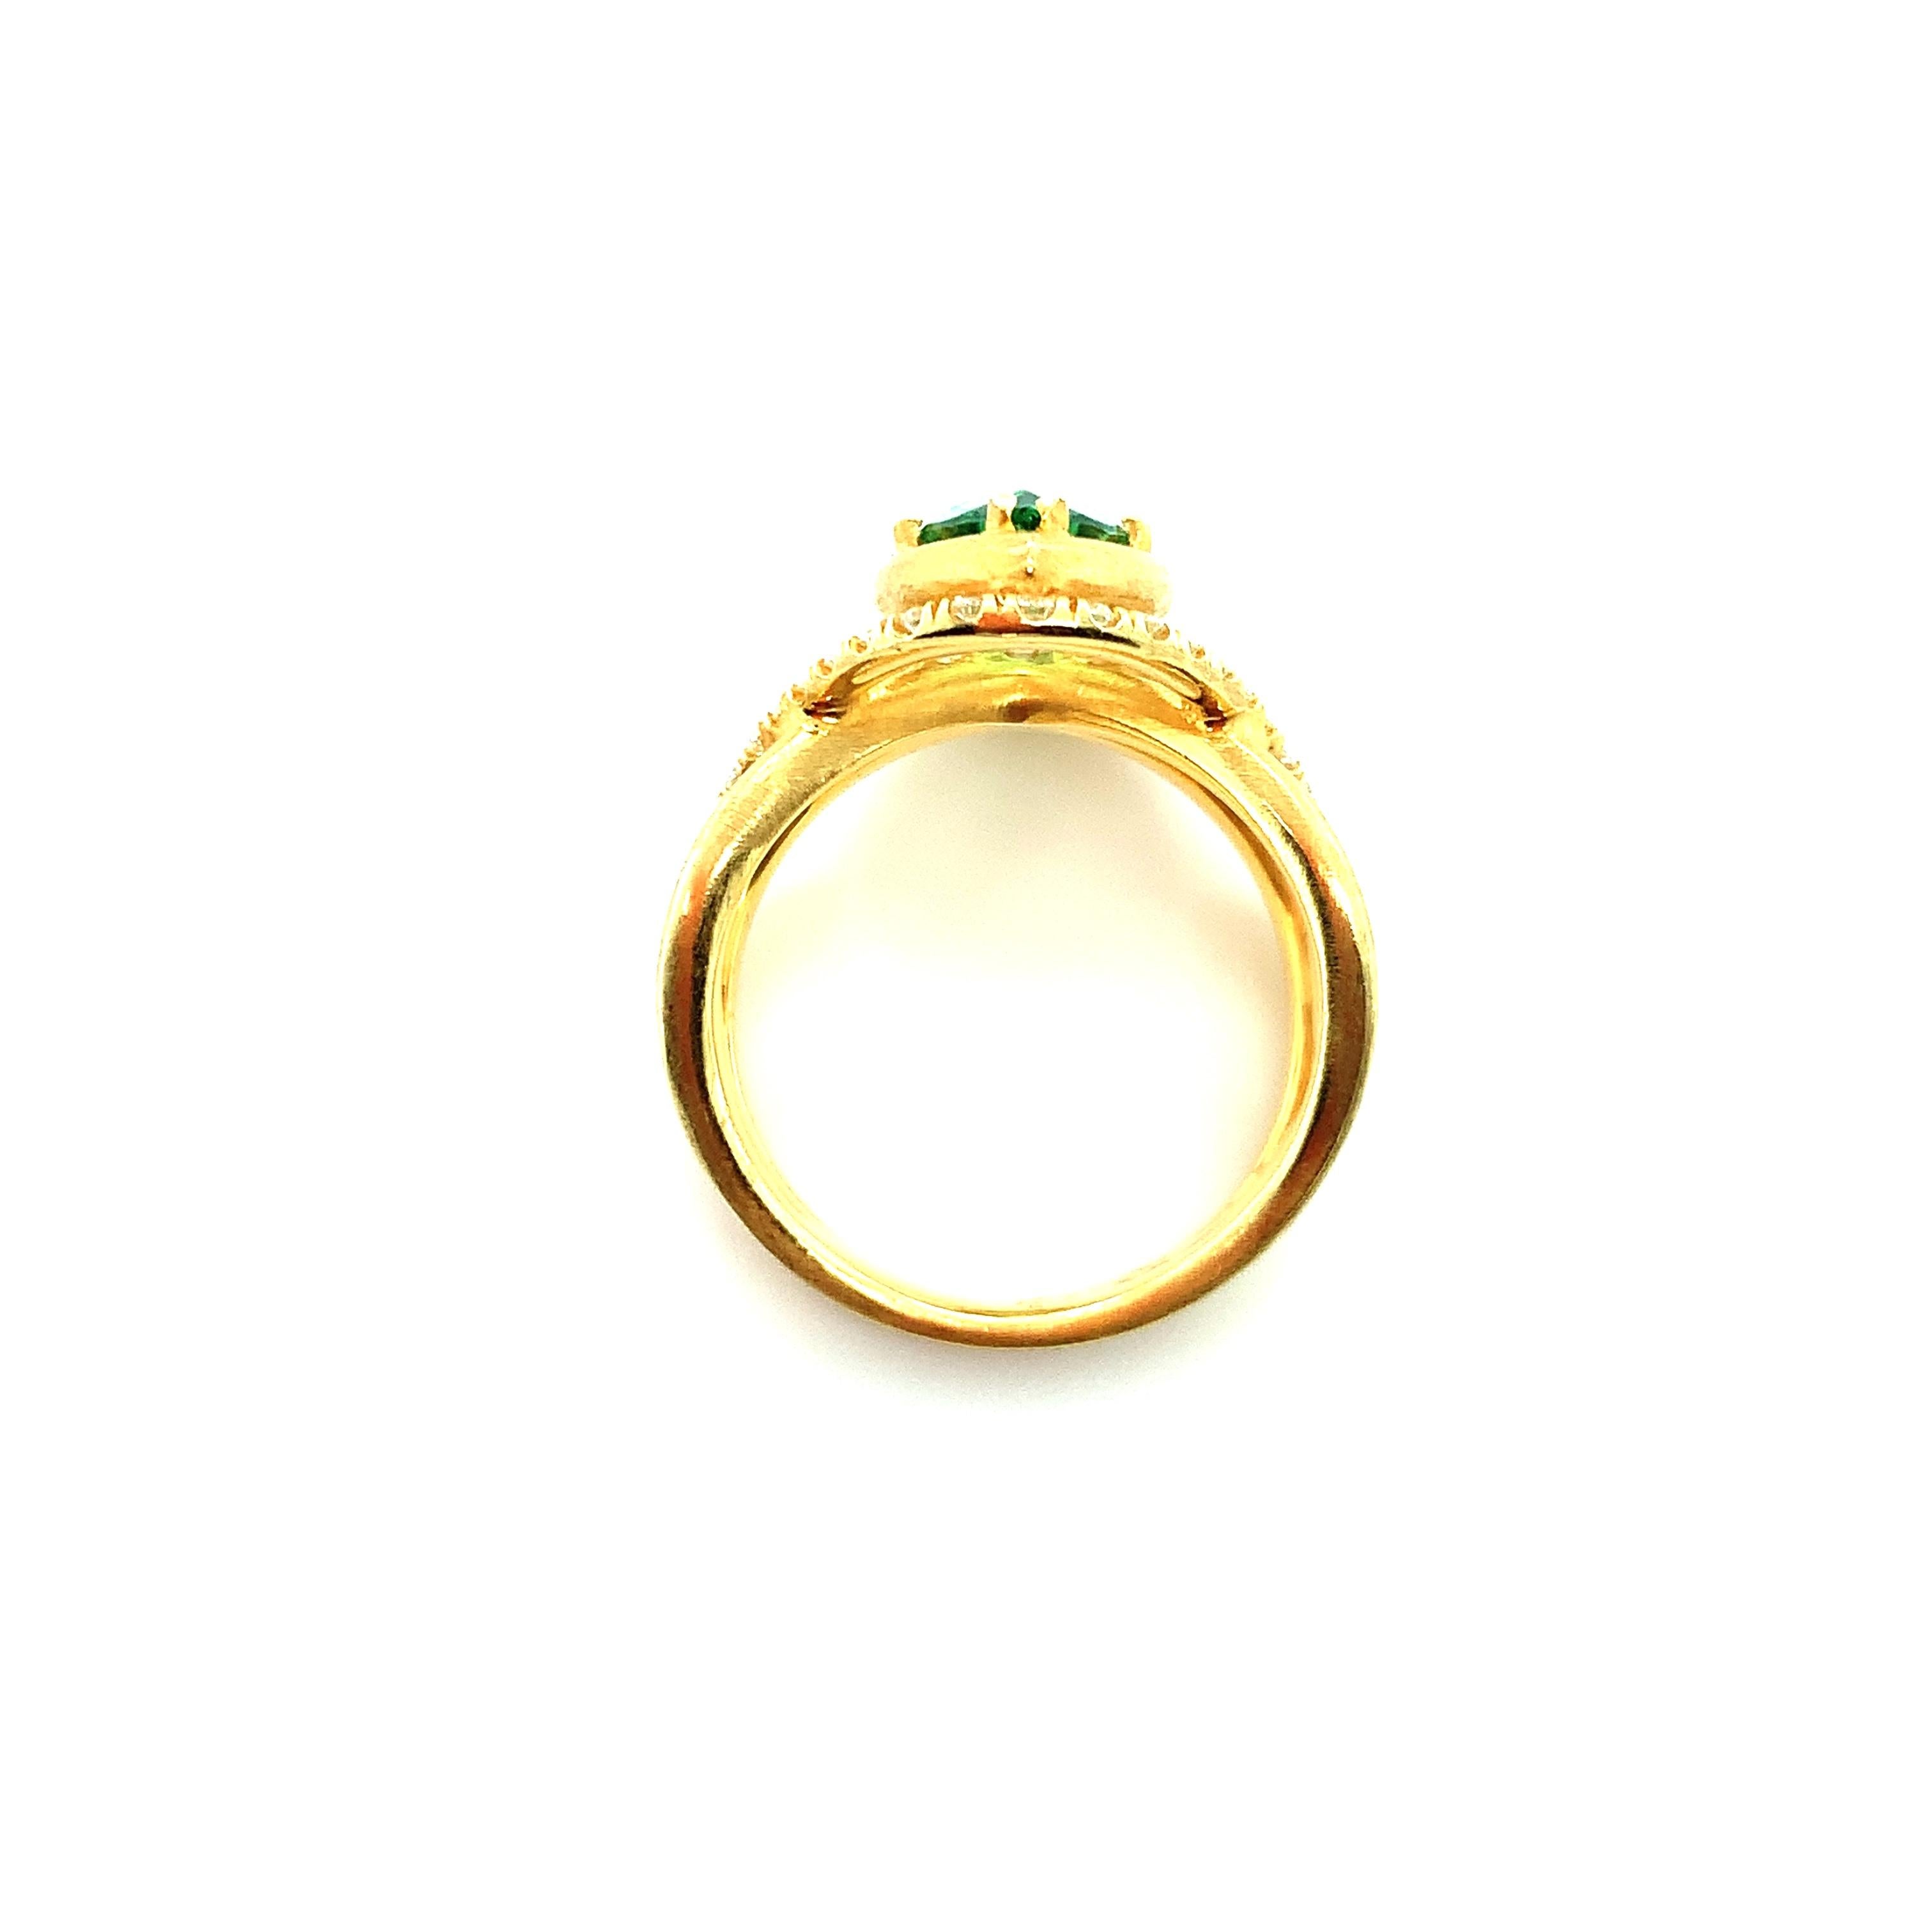 Tsavorite Garnet and Diamond Cocktail Ring in Yellow Gold, 2.95 Carats For Sale 3